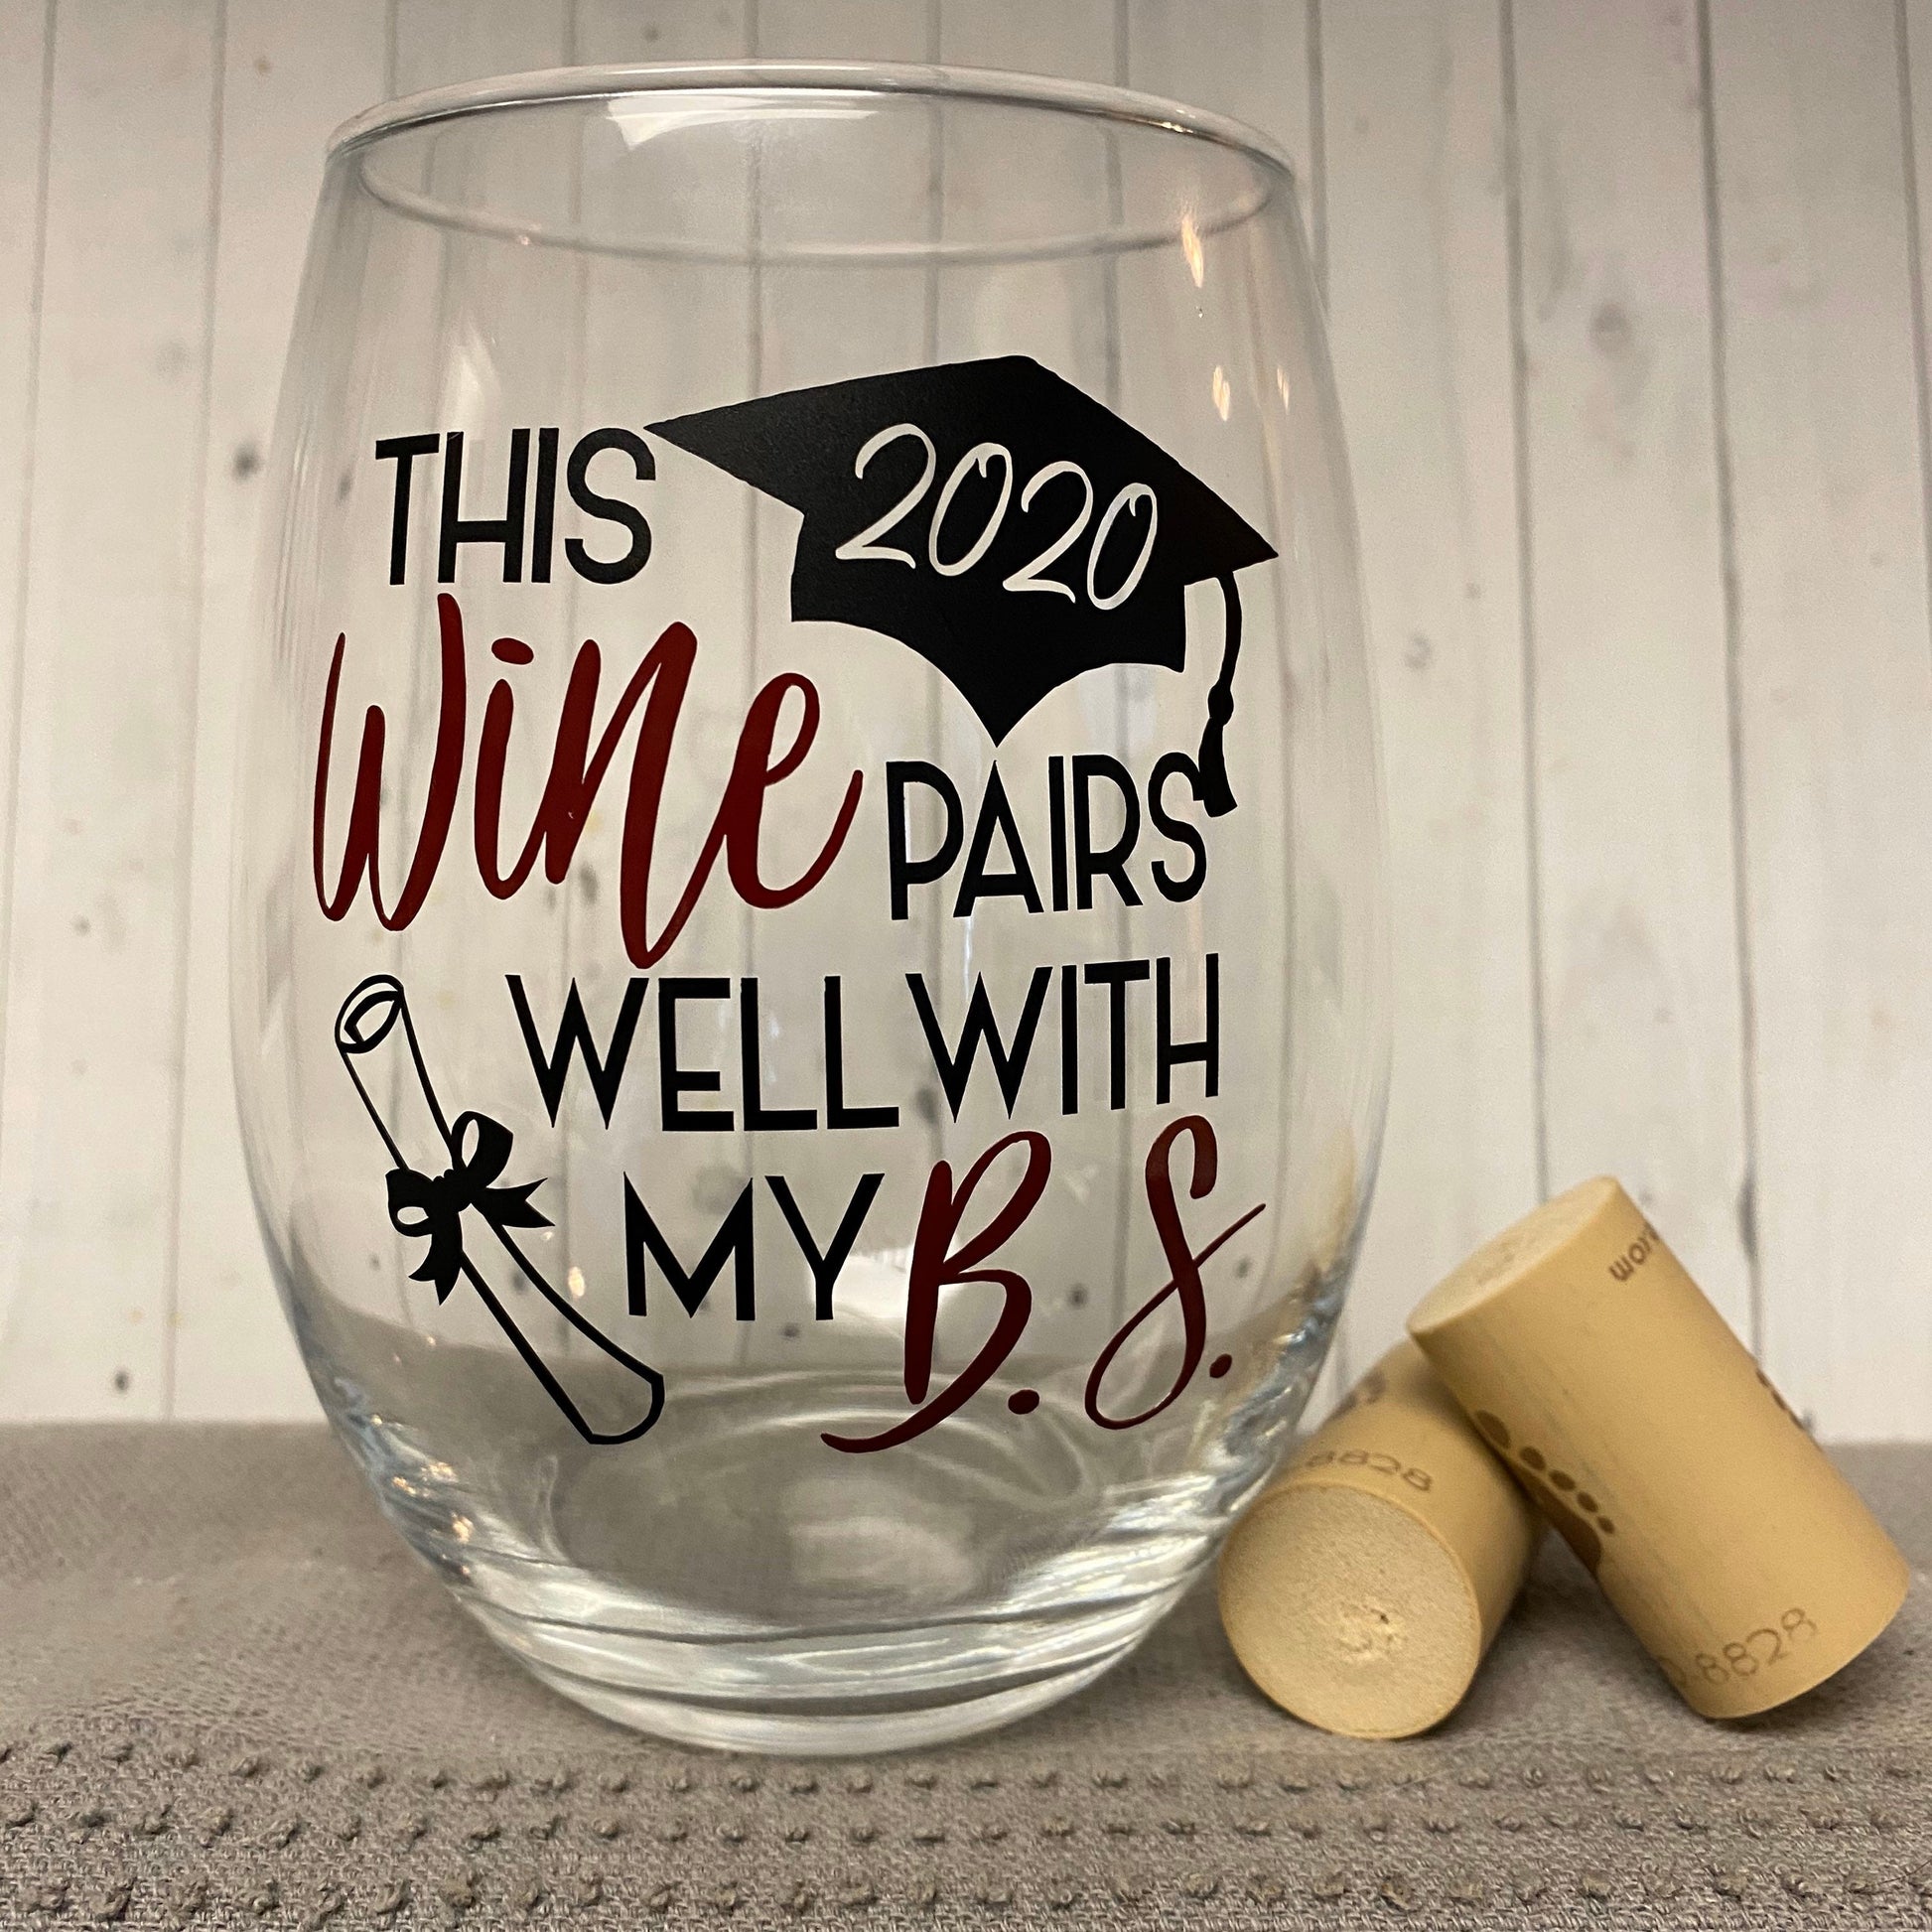 This wine pairs well with my BS, college graduation gift, funny college grad gift, bachelors of science gift, class of 2021